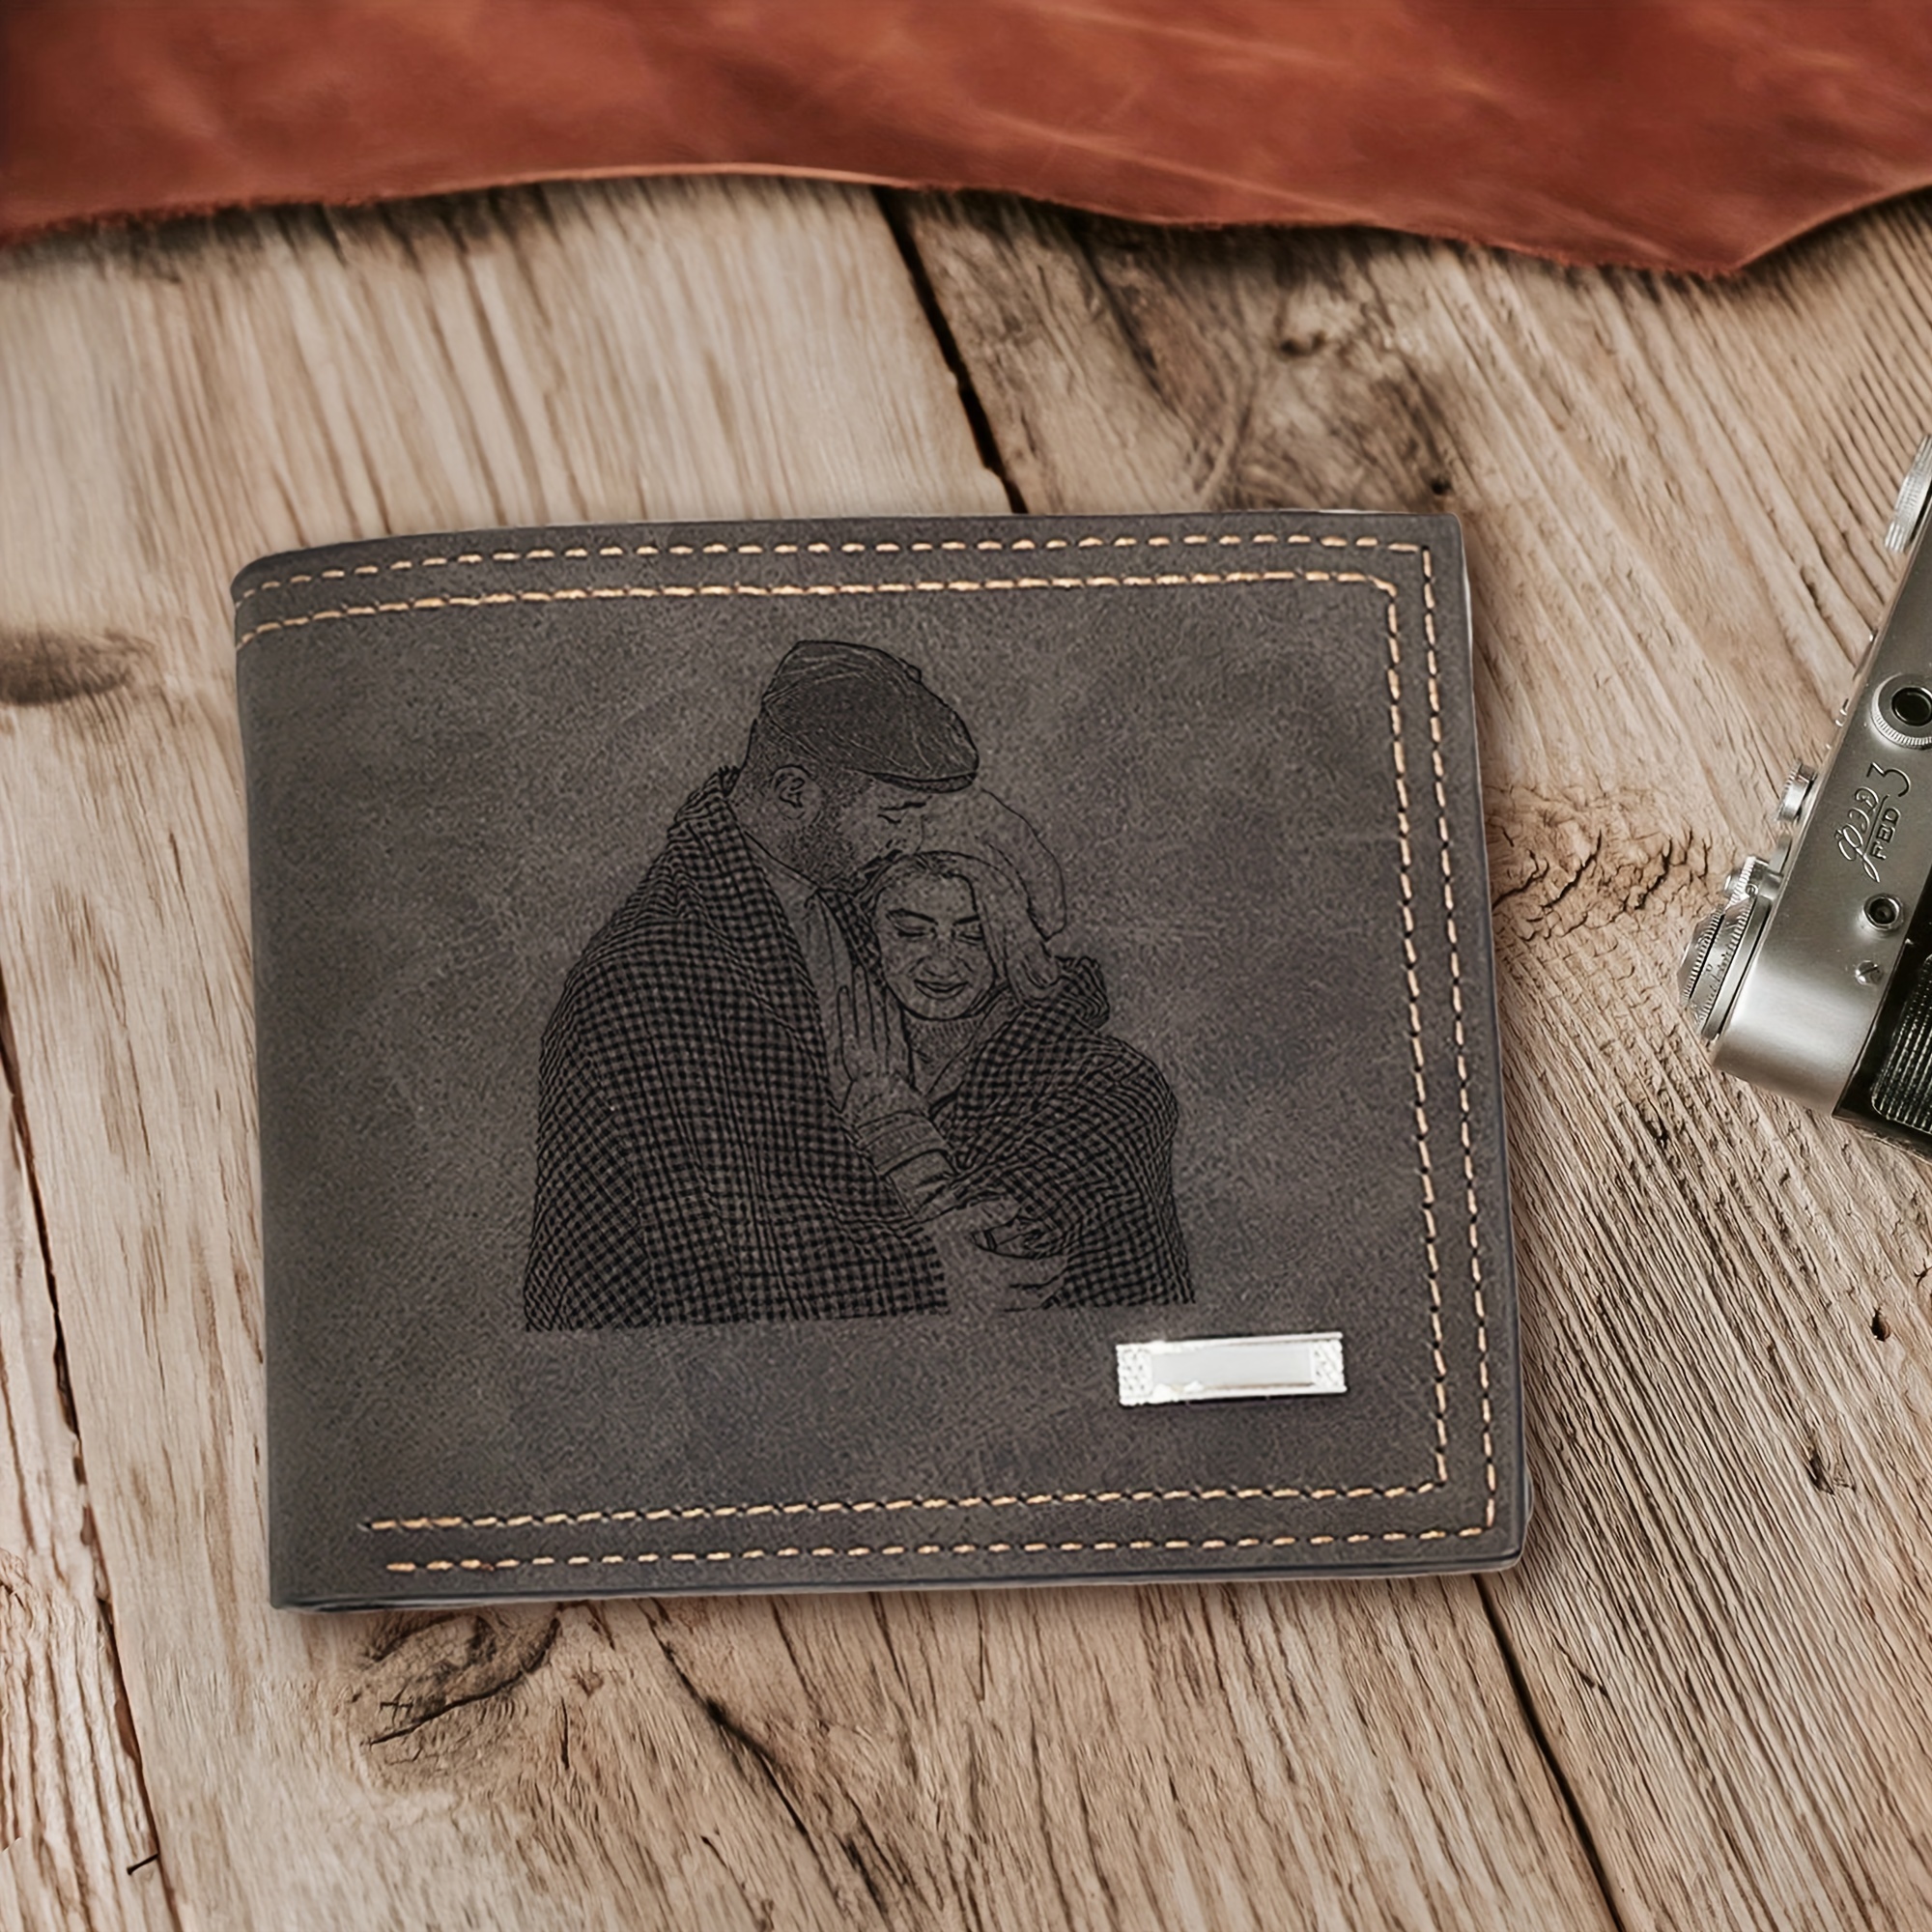 

Wallet For Men, Personalized Customized Engraved Text Photo, Suitable For Festivals, Father's Day, Valentine's Day, Birthday, Party, Precious Gifts For Dad Husband Boyfriend